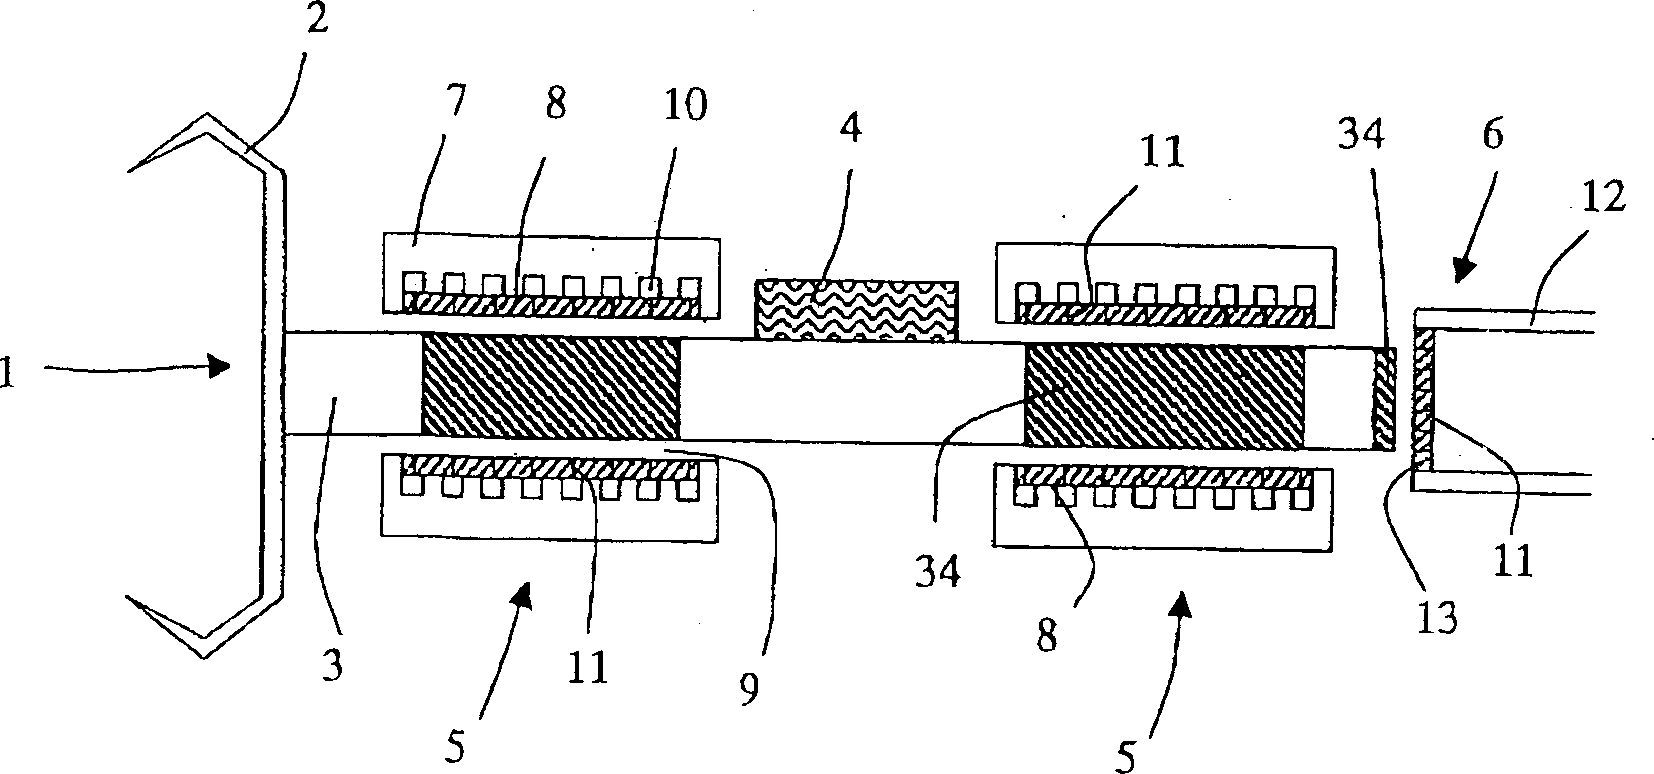 Open spinning appst. having air static force radial bearing for spinning rotor